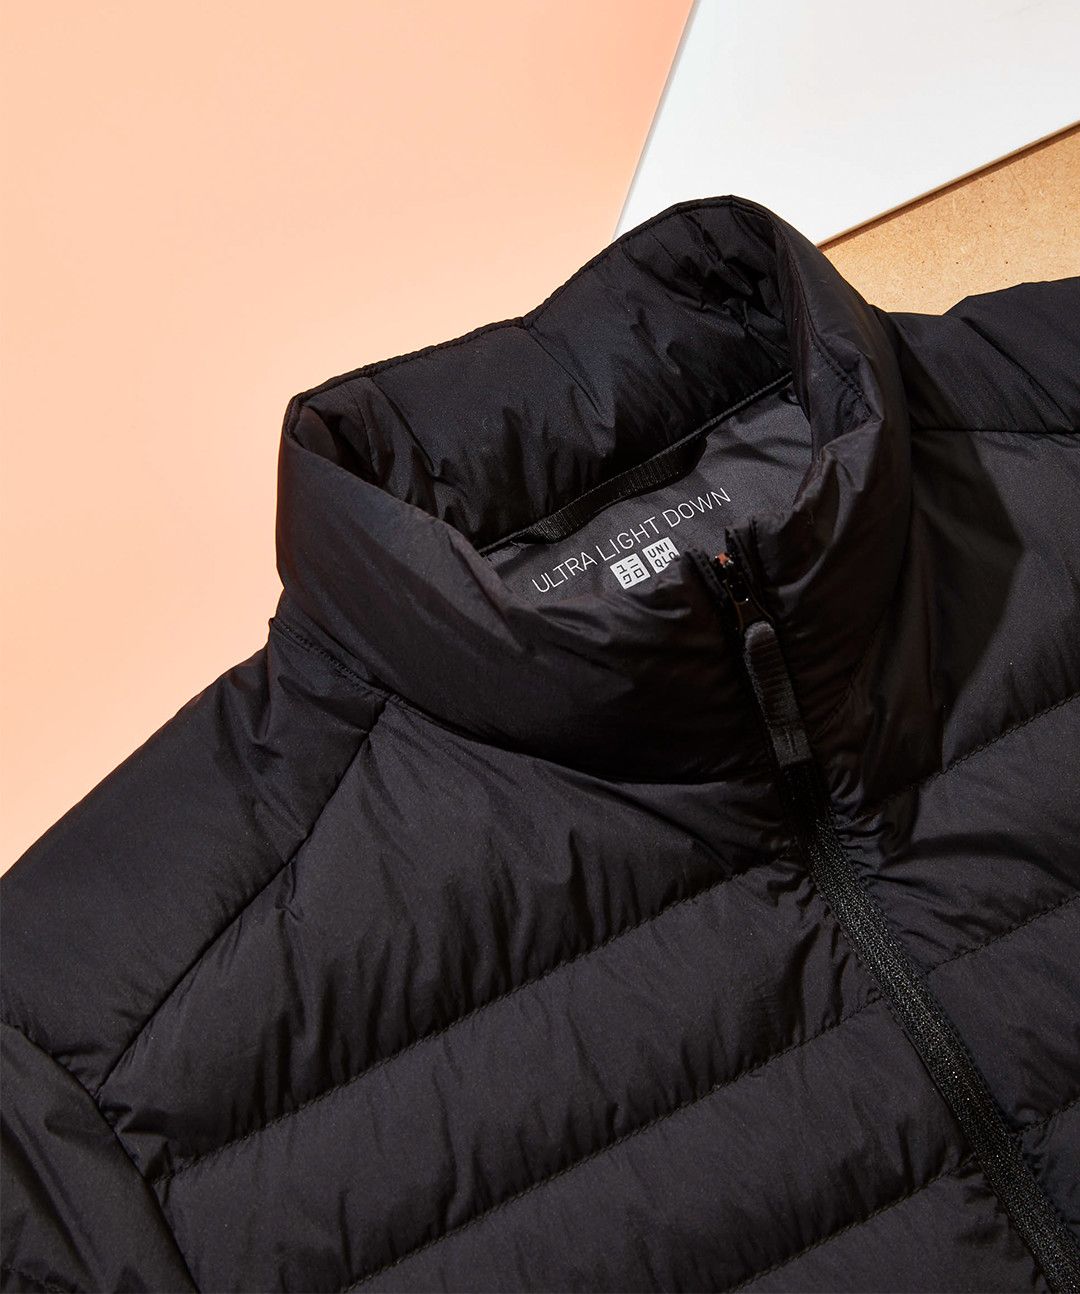 Uniqlo's Warm, Layerable, Ultra Light Down Jacket Will Keep You